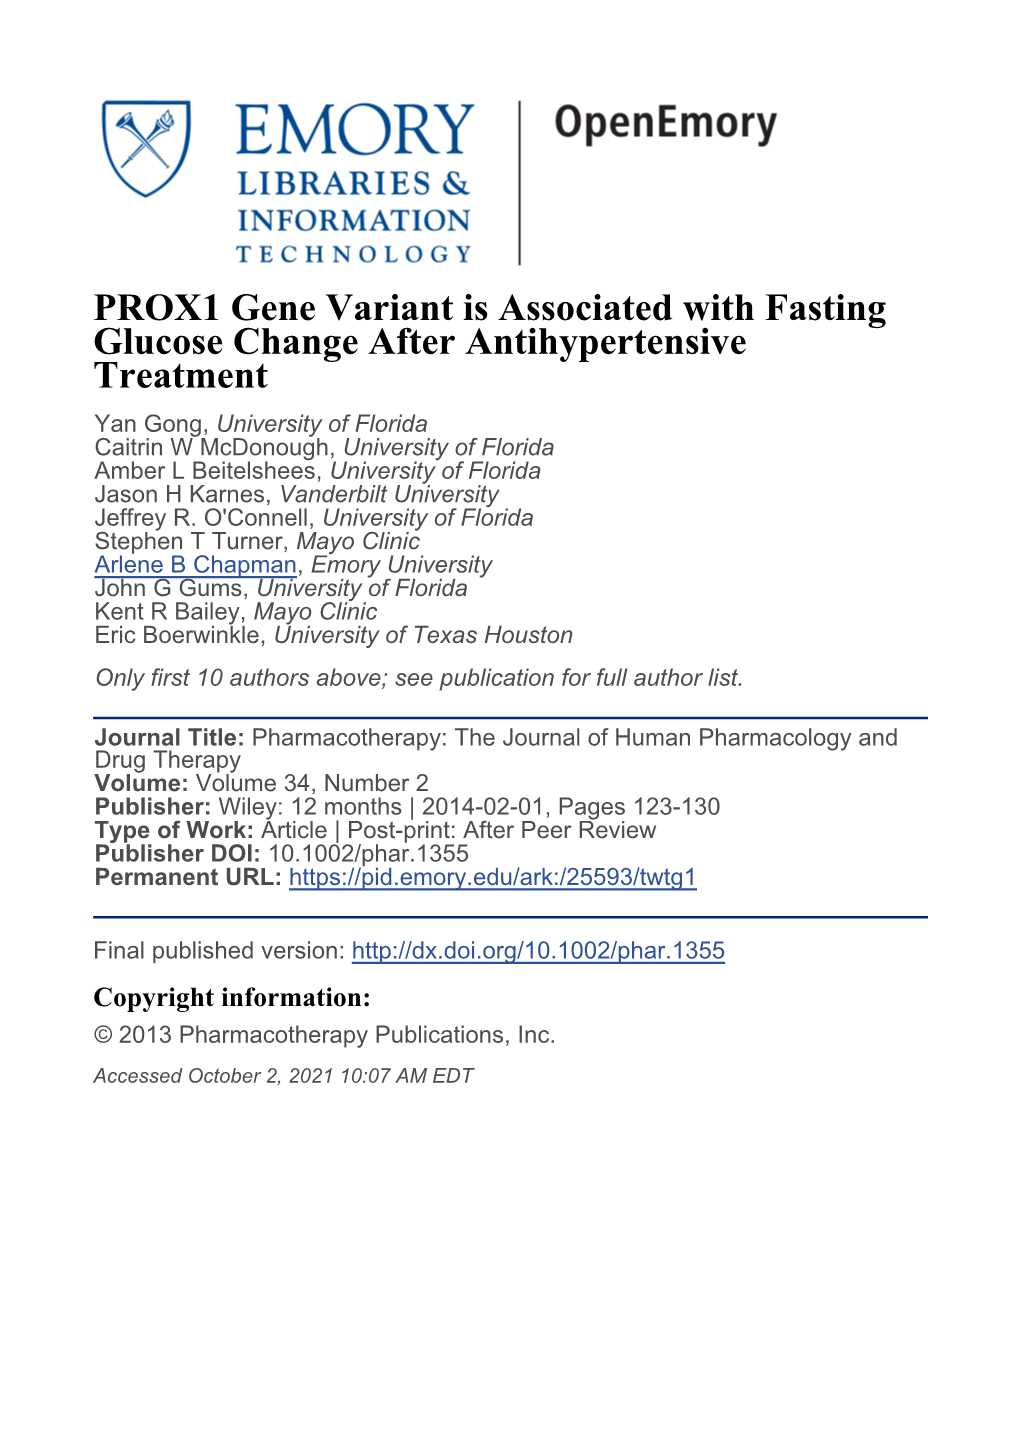 PROX1 Gene Variant Is Associated with Fasting